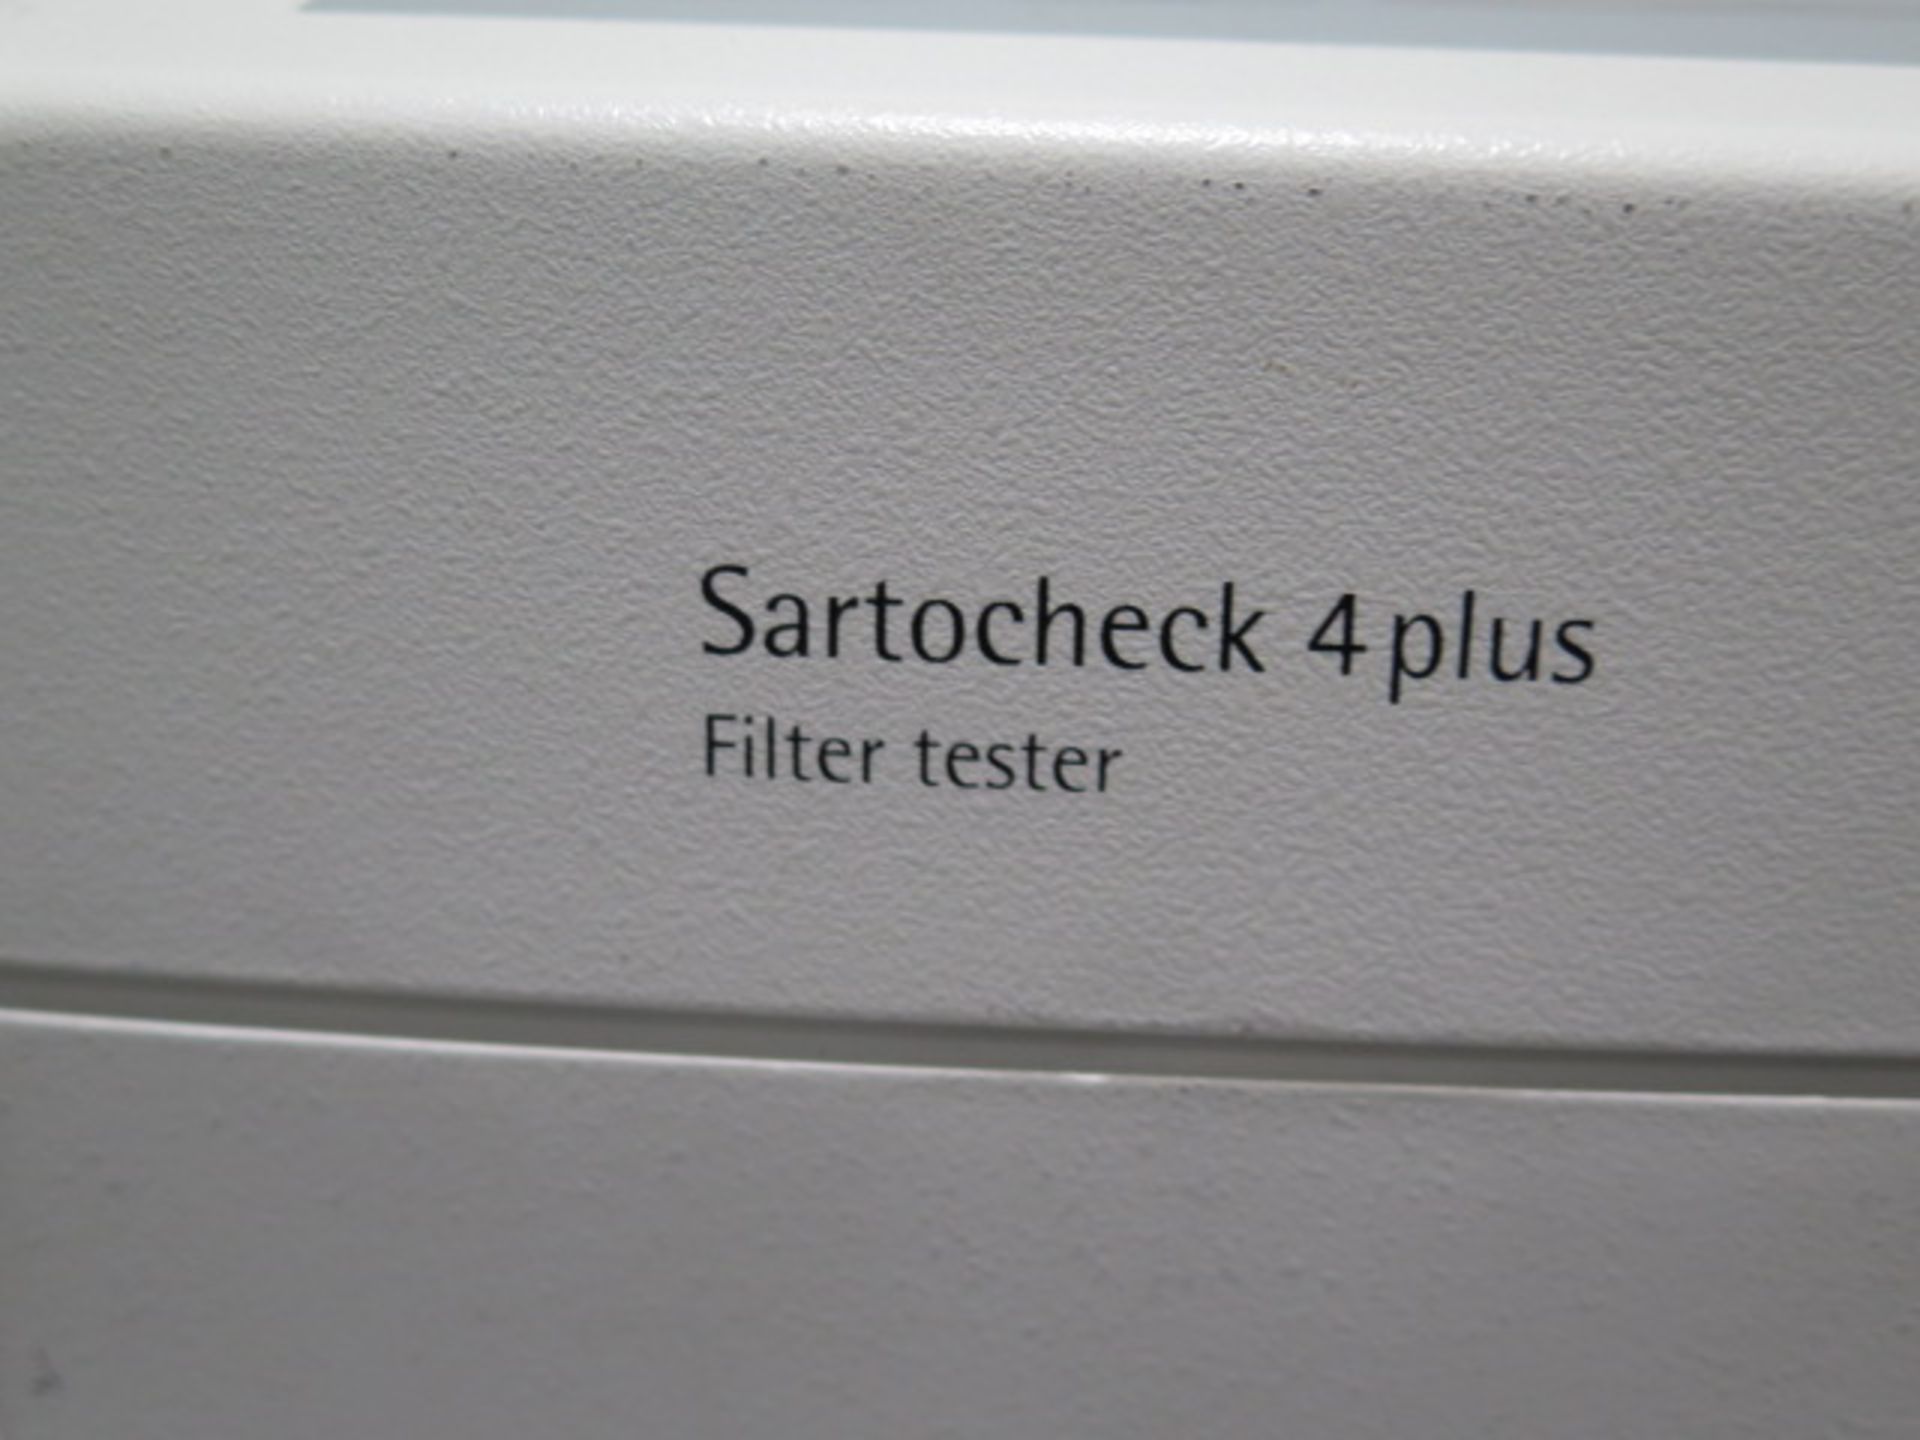 Sartorius Stedim Biotec Sartocheck 4plus Filter Tester (FOR PARTS) (SOLD AS-IS - NO WARRANTY) - Image 6 of 8